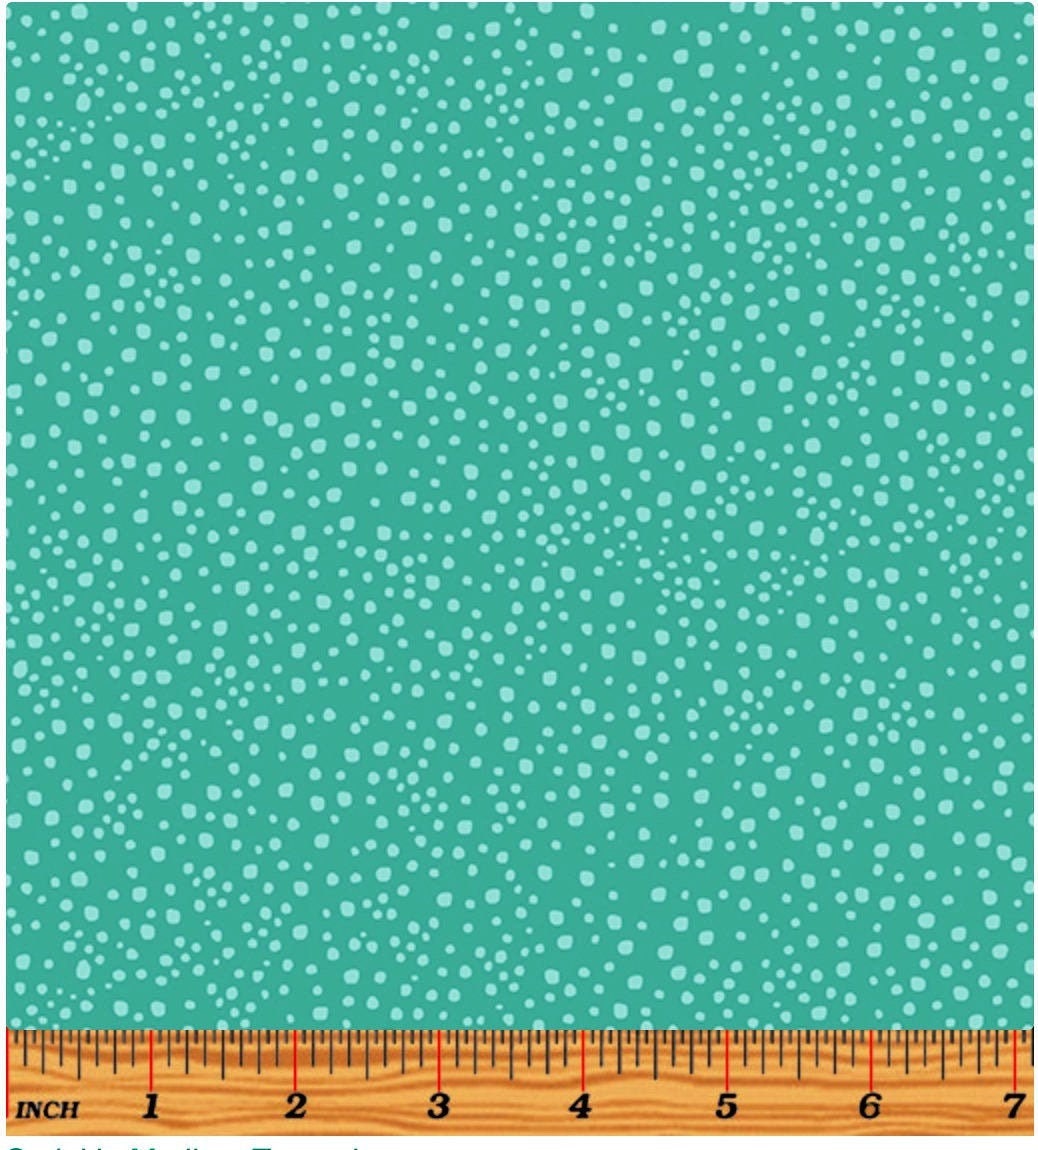 Green Turquoise Blender Fabric, Turquoise Sprinkles Tone On Fabric 100% Cotton For Sewing